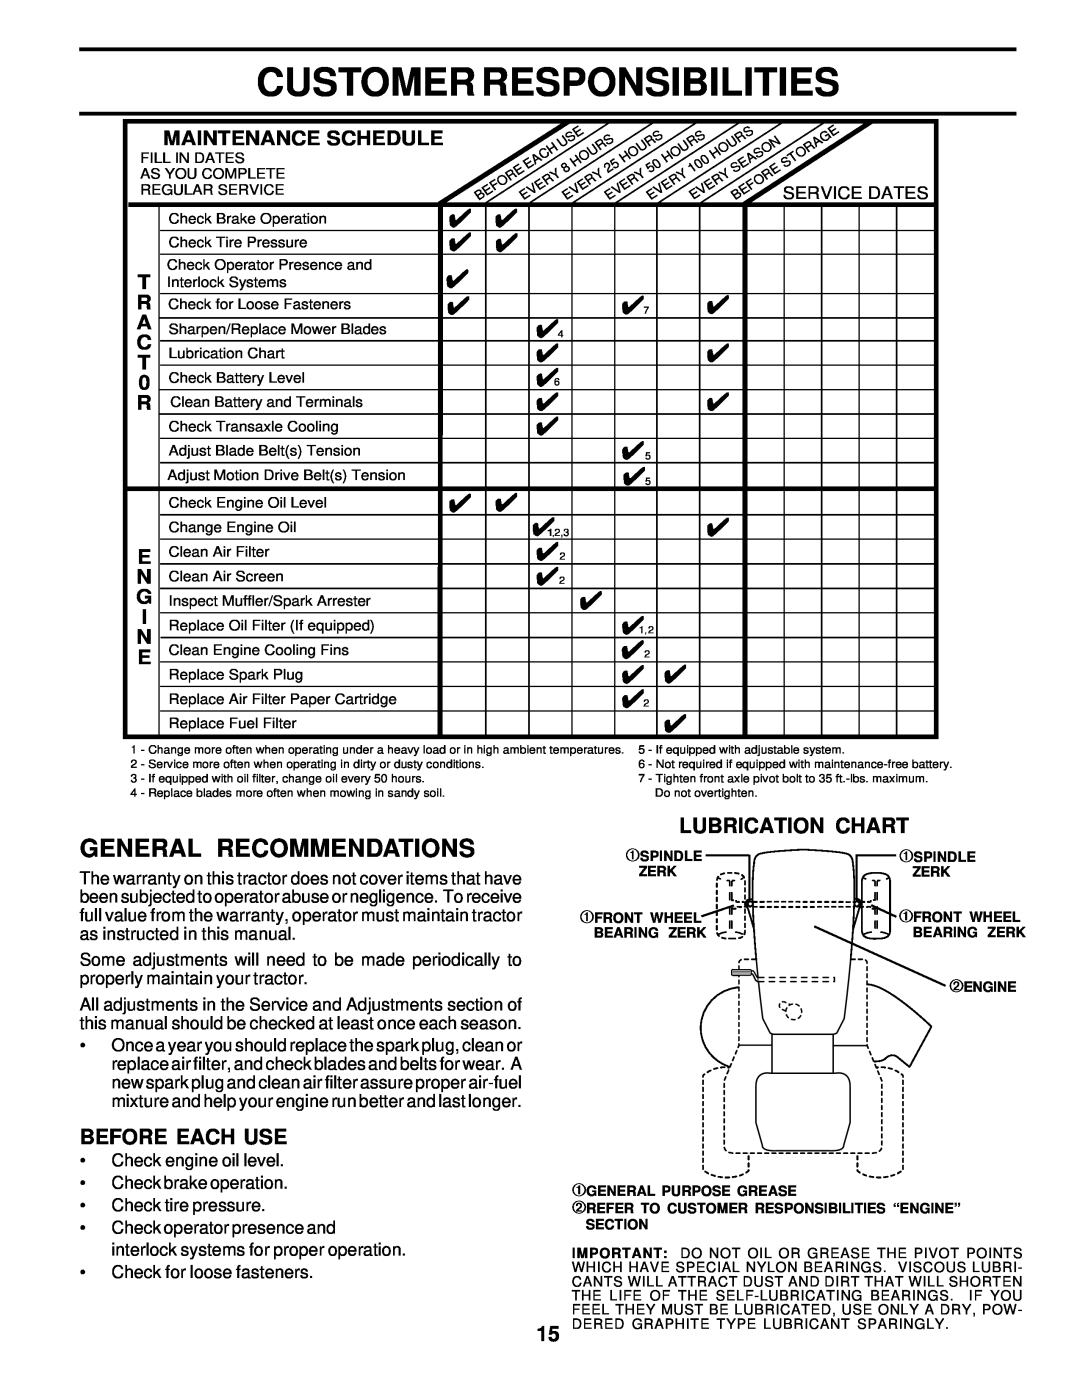 Poulan 177029 Customer Responsibilities, General Recommendations, Before Each Use, Lubrication Chart, Maintenance Schedule 